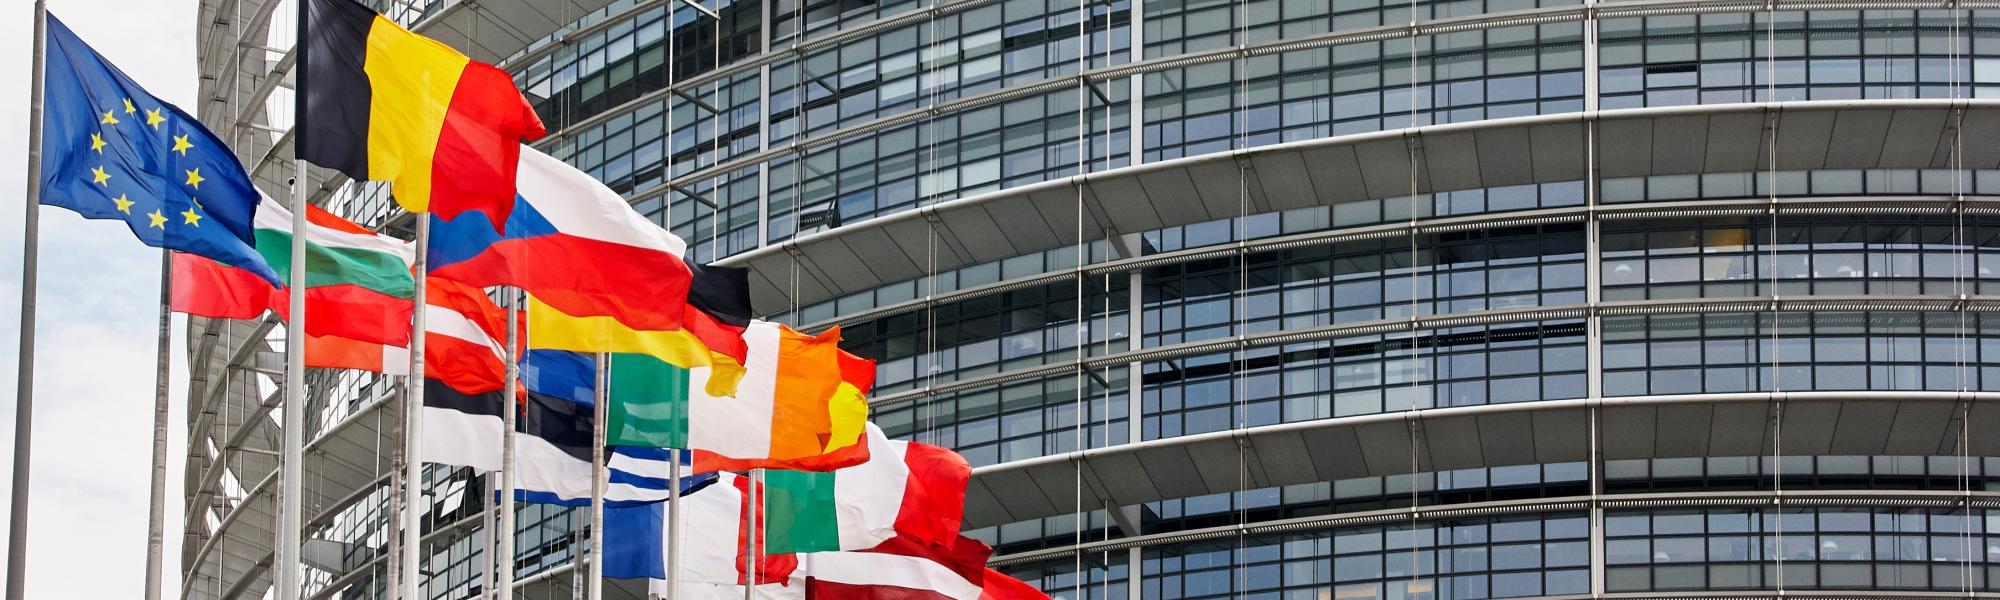 European Parliament building in Strasbourg with the flags of the Member States